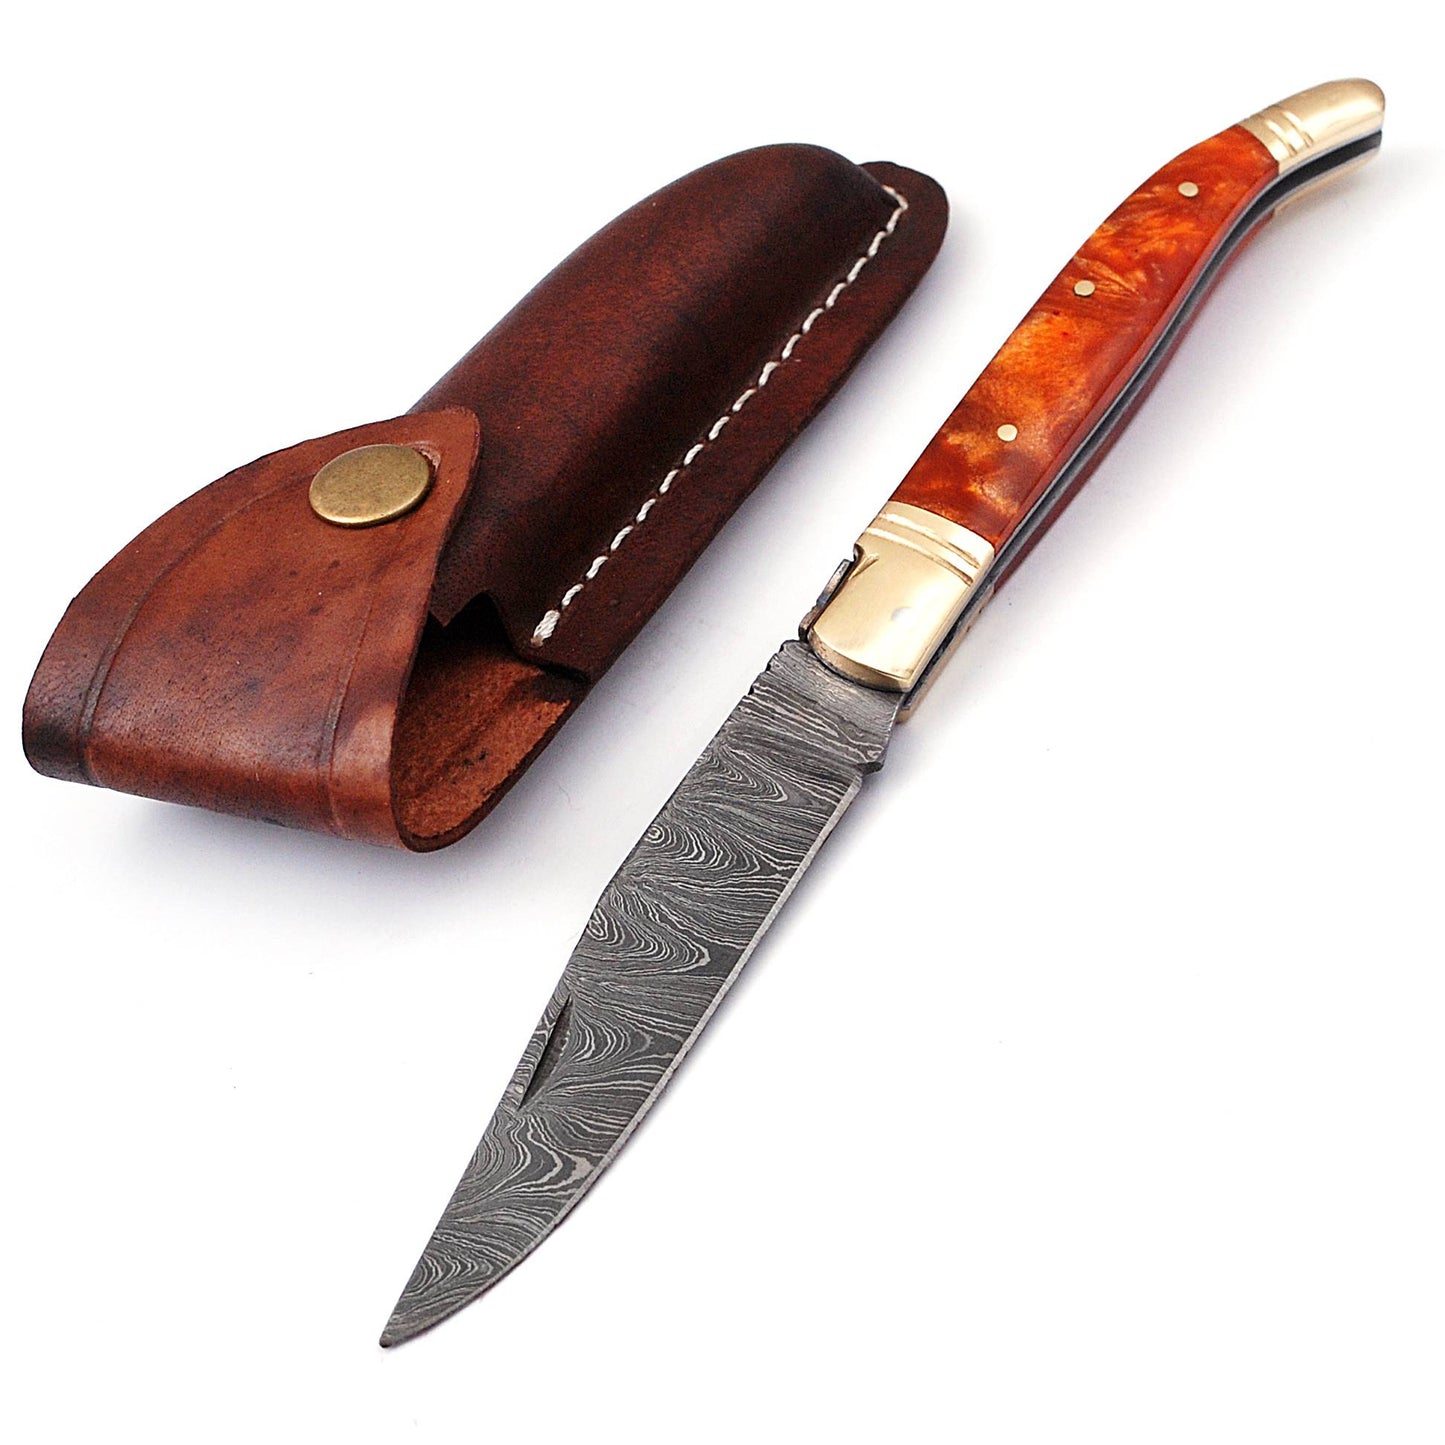 Laguiole Folding Damascus steel knife, 8.5" Long with 4" hand forged custom twist pattern Blade.Orange color unshrinkable Raisen scale with brass bolster, Cow hide leather sheath included